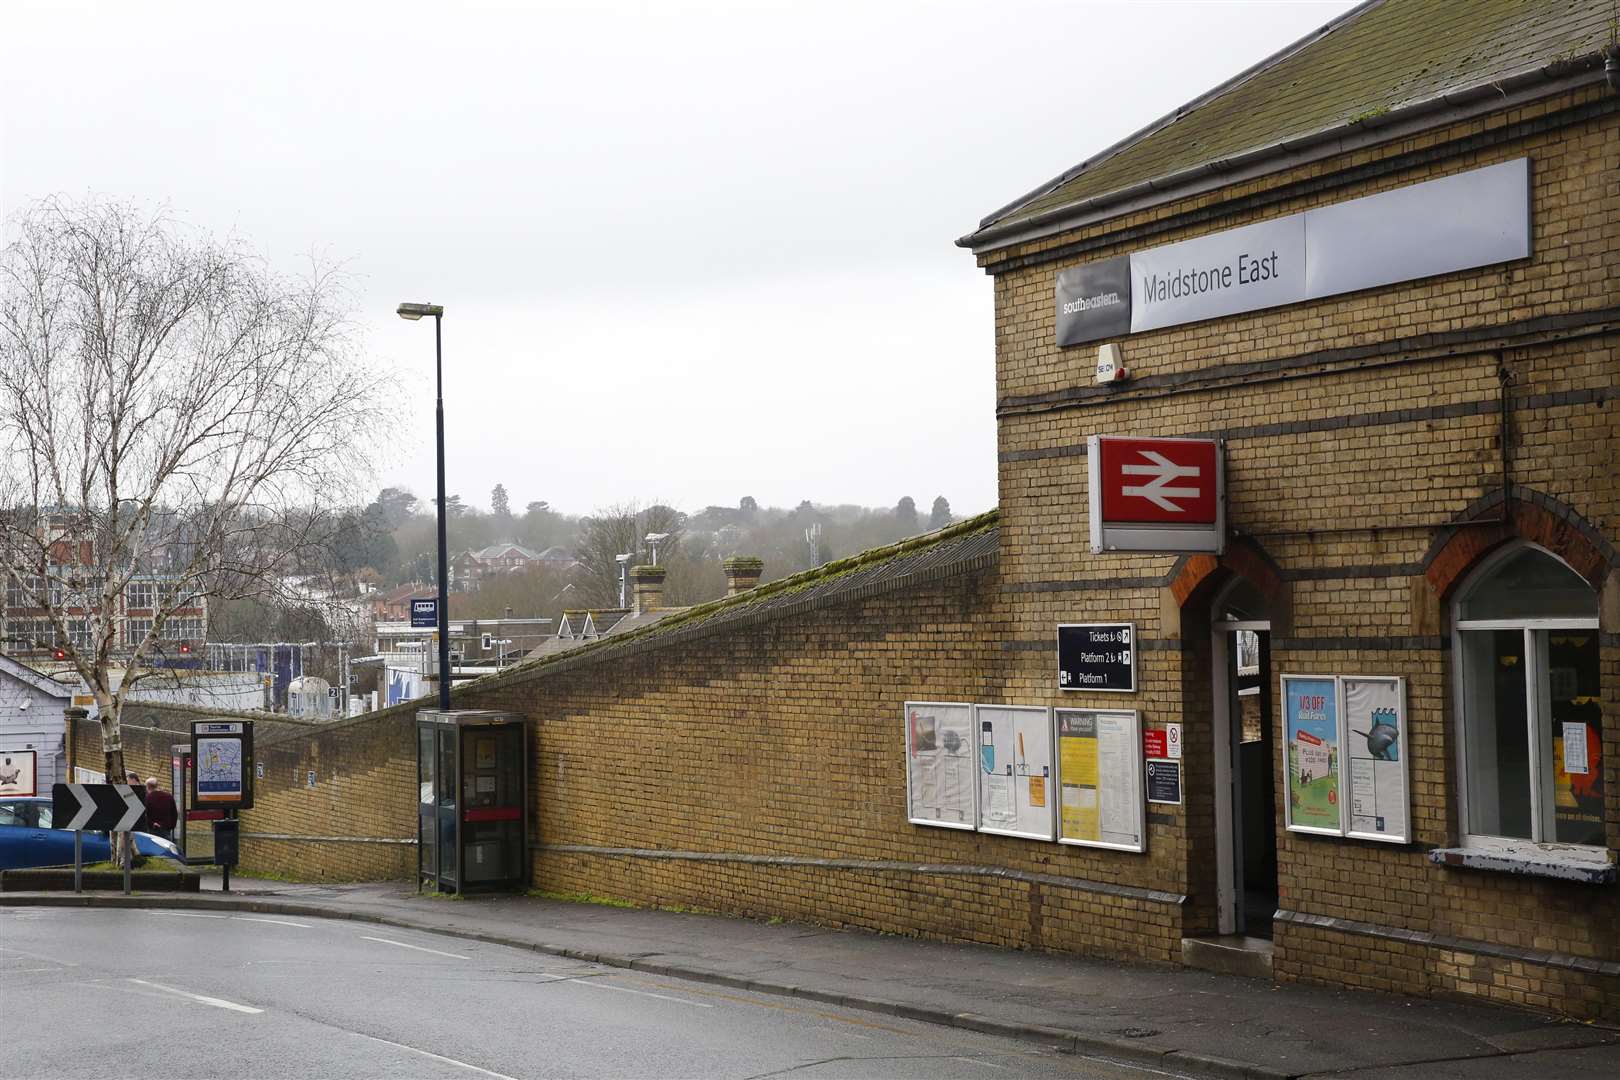 Maidstone East station will benefit from improved rail links, insists transport secretary Chris Grayling. Picture: Martin Apps